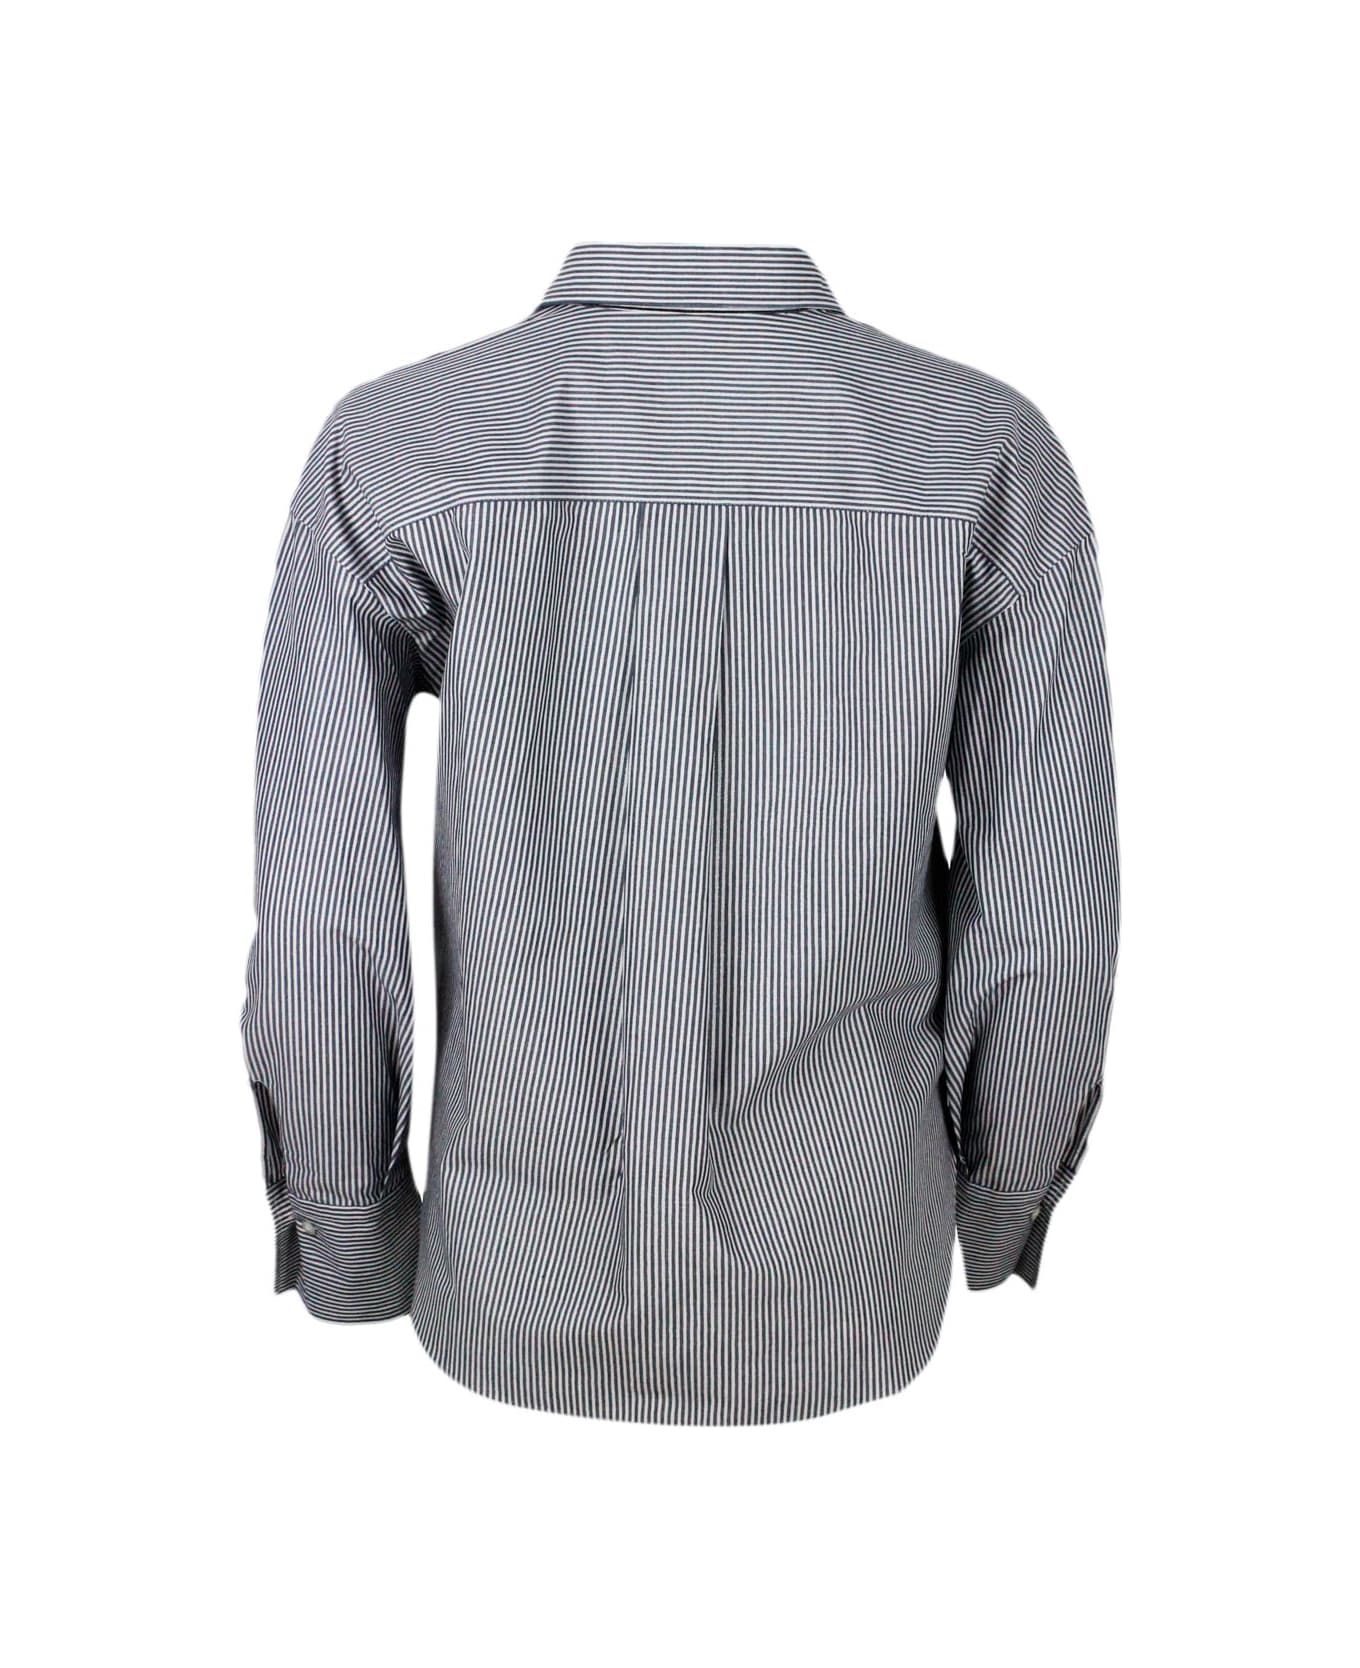 Brunello Cucinelli Long-sleeved Shirt Made Of Cotton With A Striped Pattern Embellished With Bright Lurex Threads - Blu